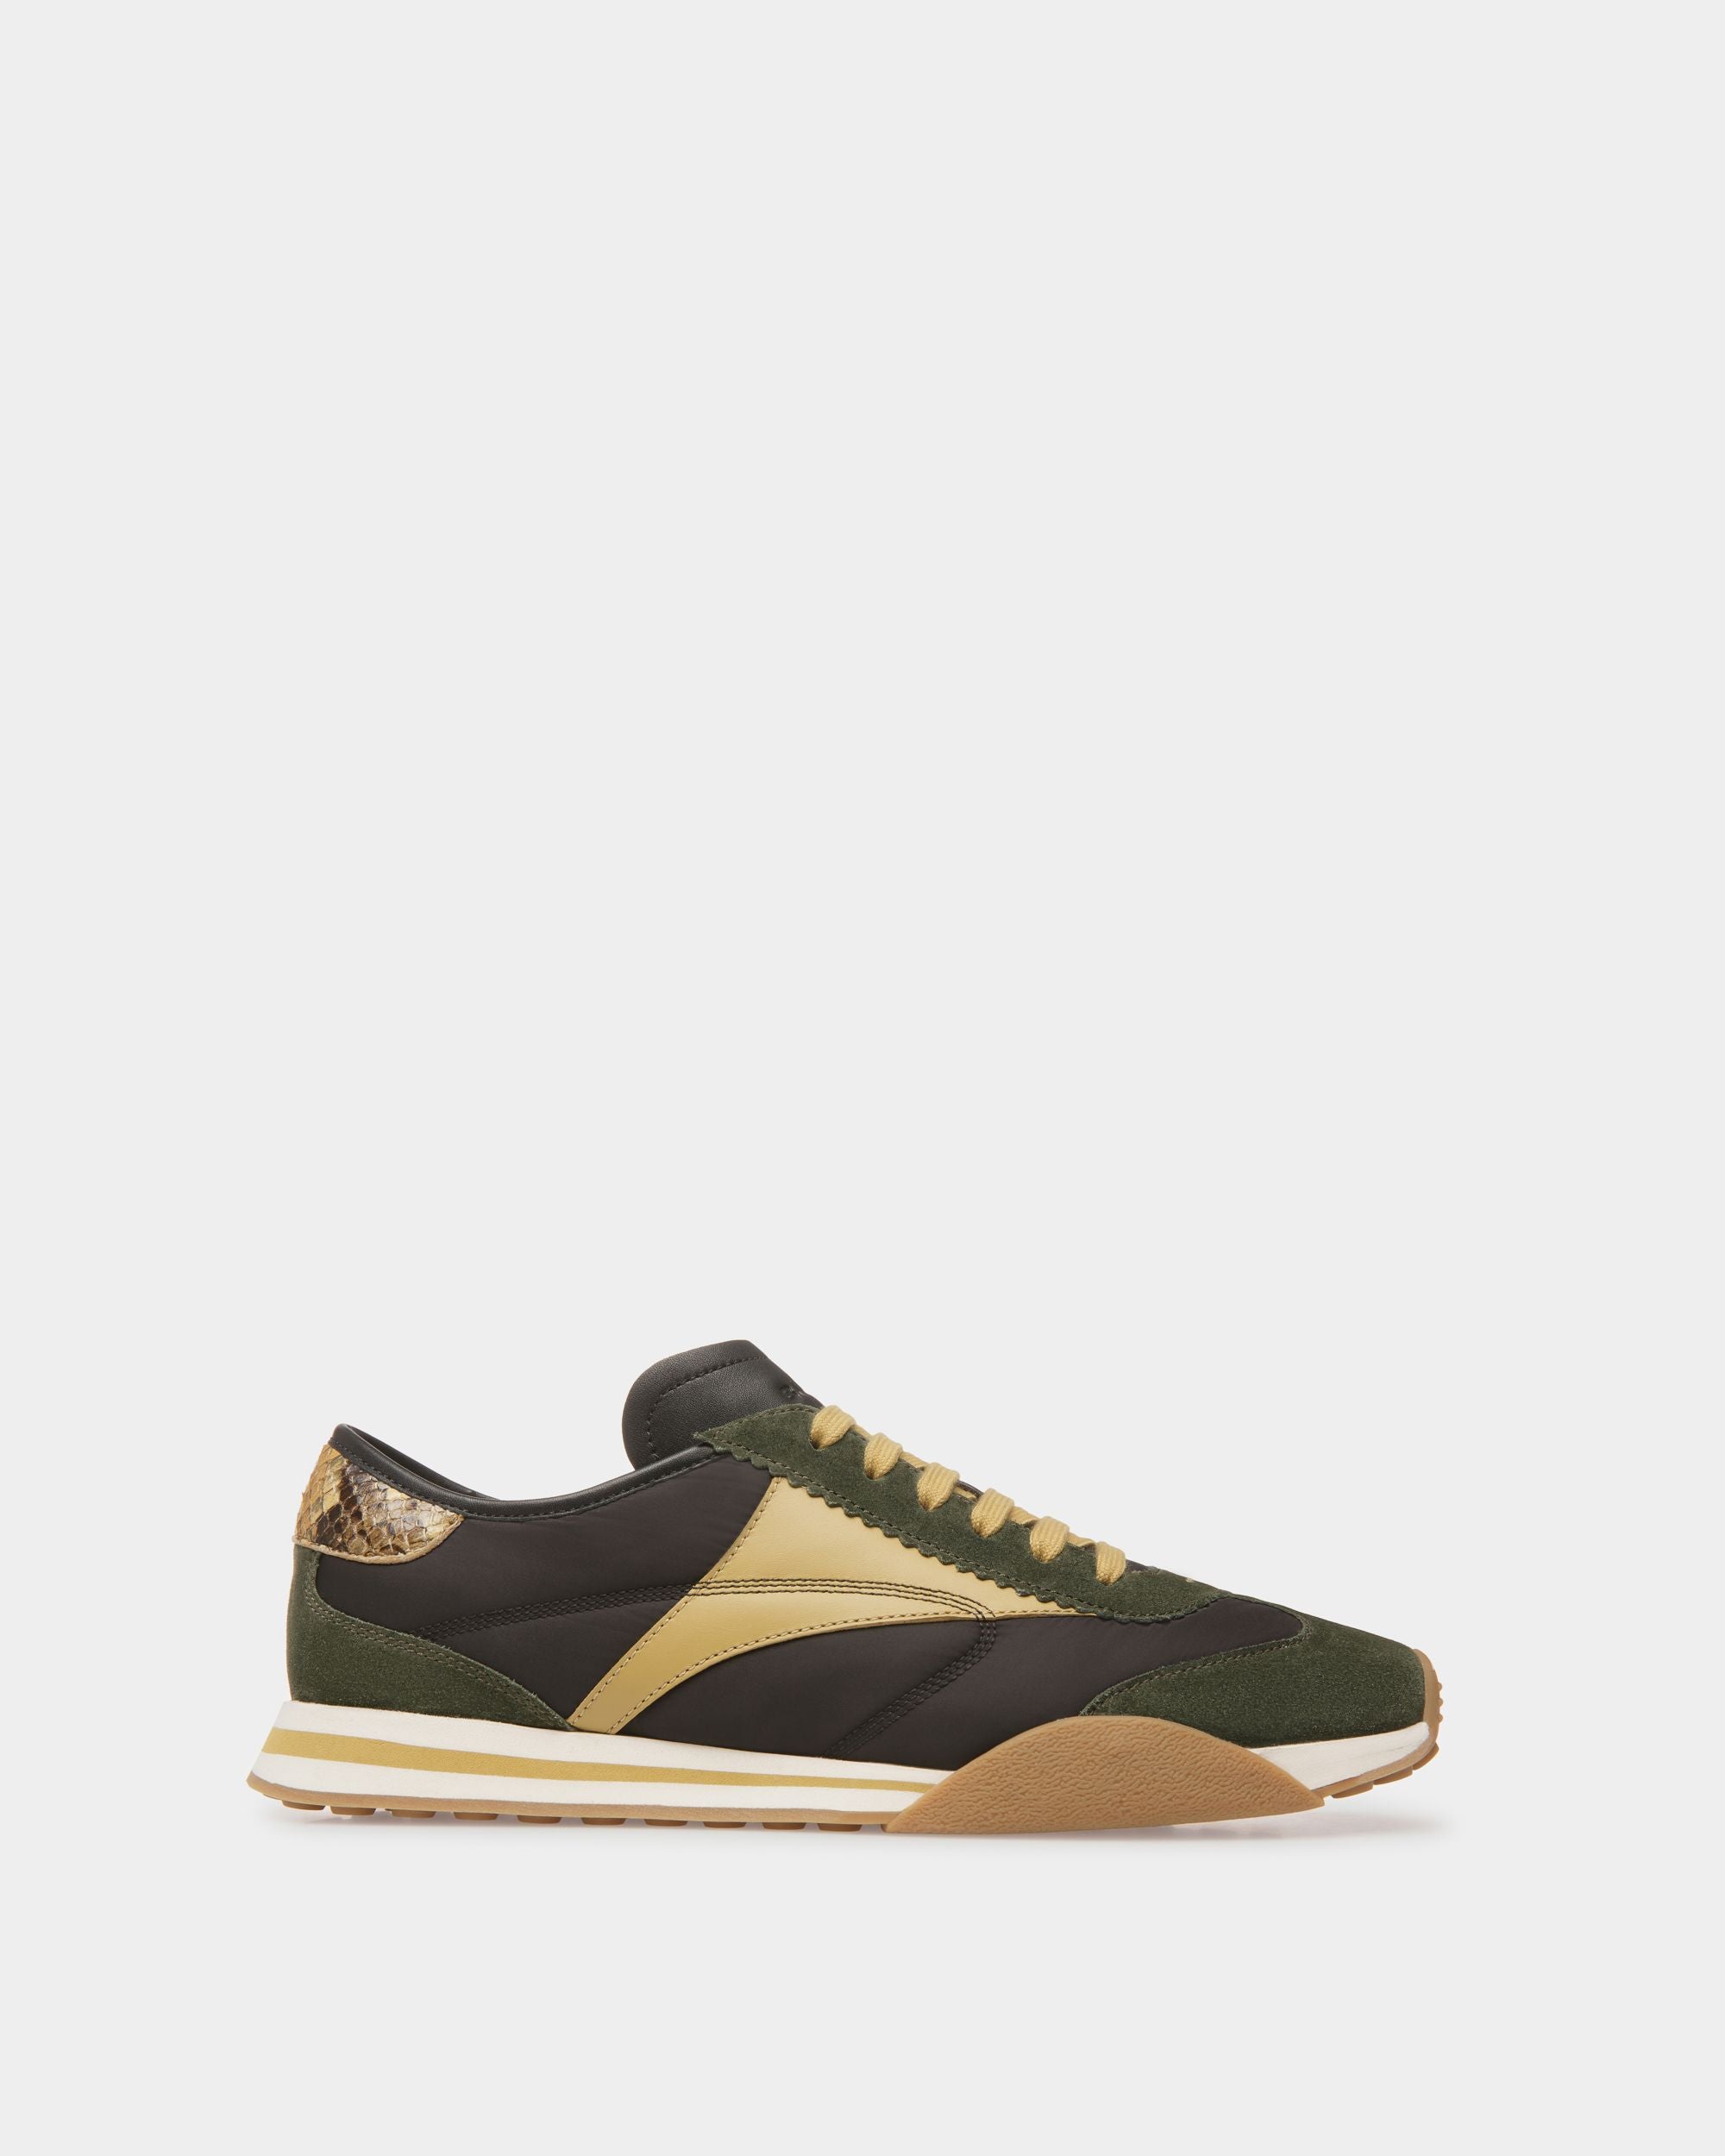 Sonney | Men's Sneakers | Green And Black Leather And Fabric | Bally | Still Life Side